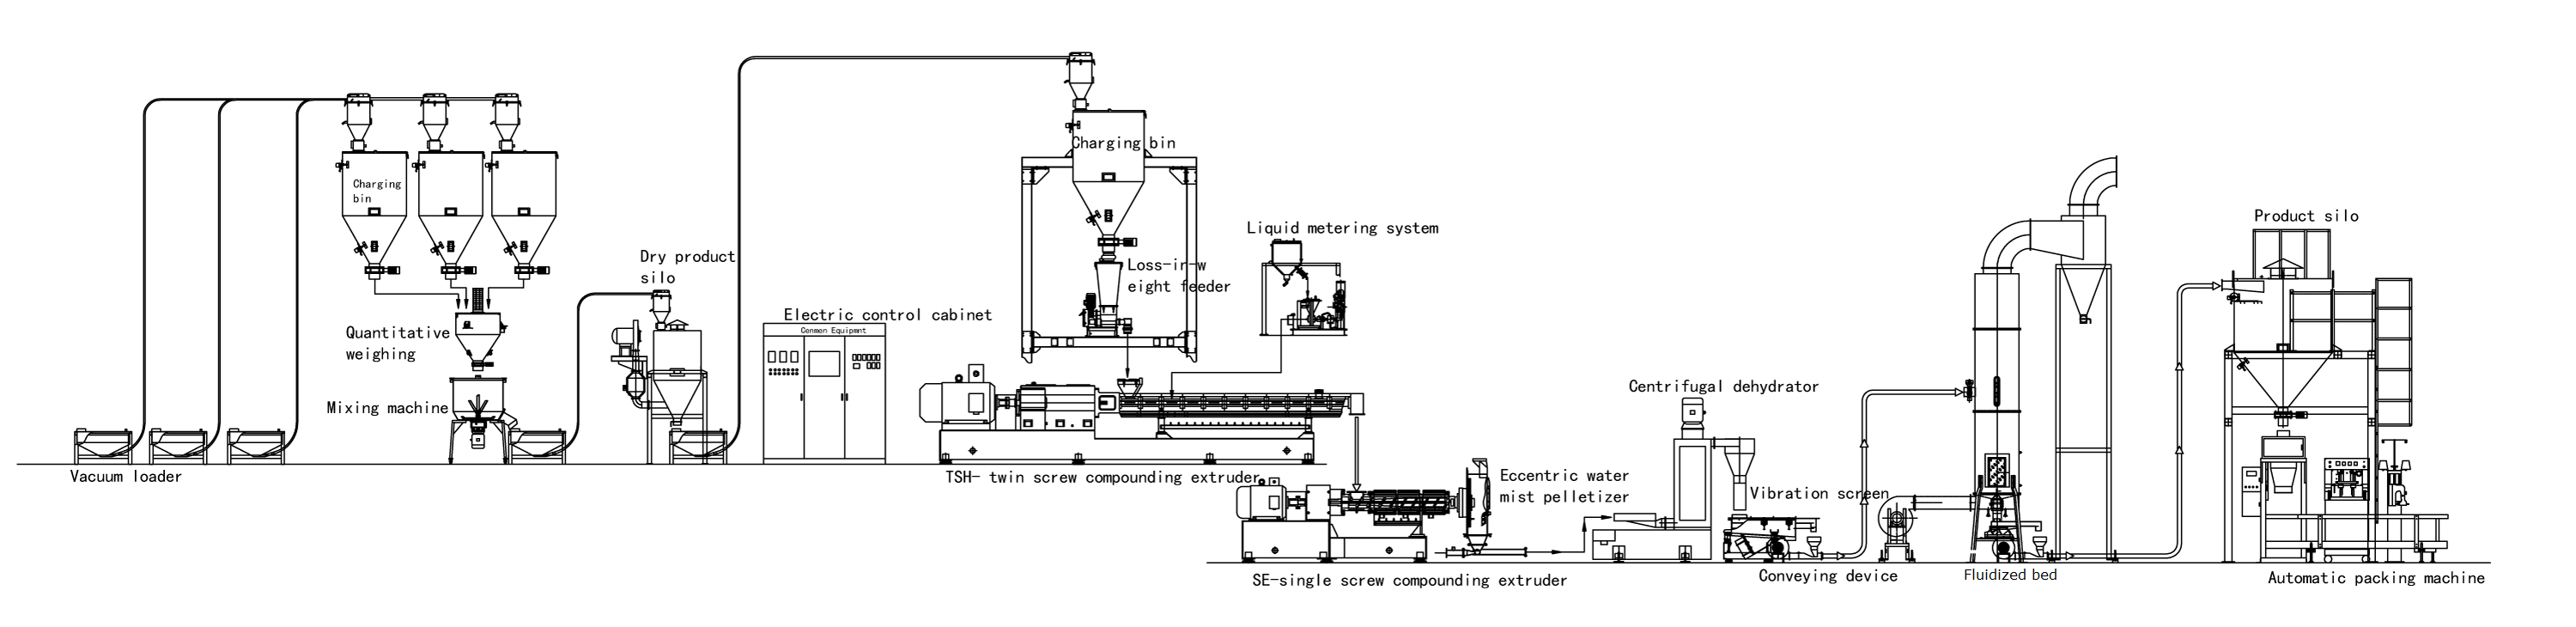 Process flow chart for A material equipment for Silane XLPE